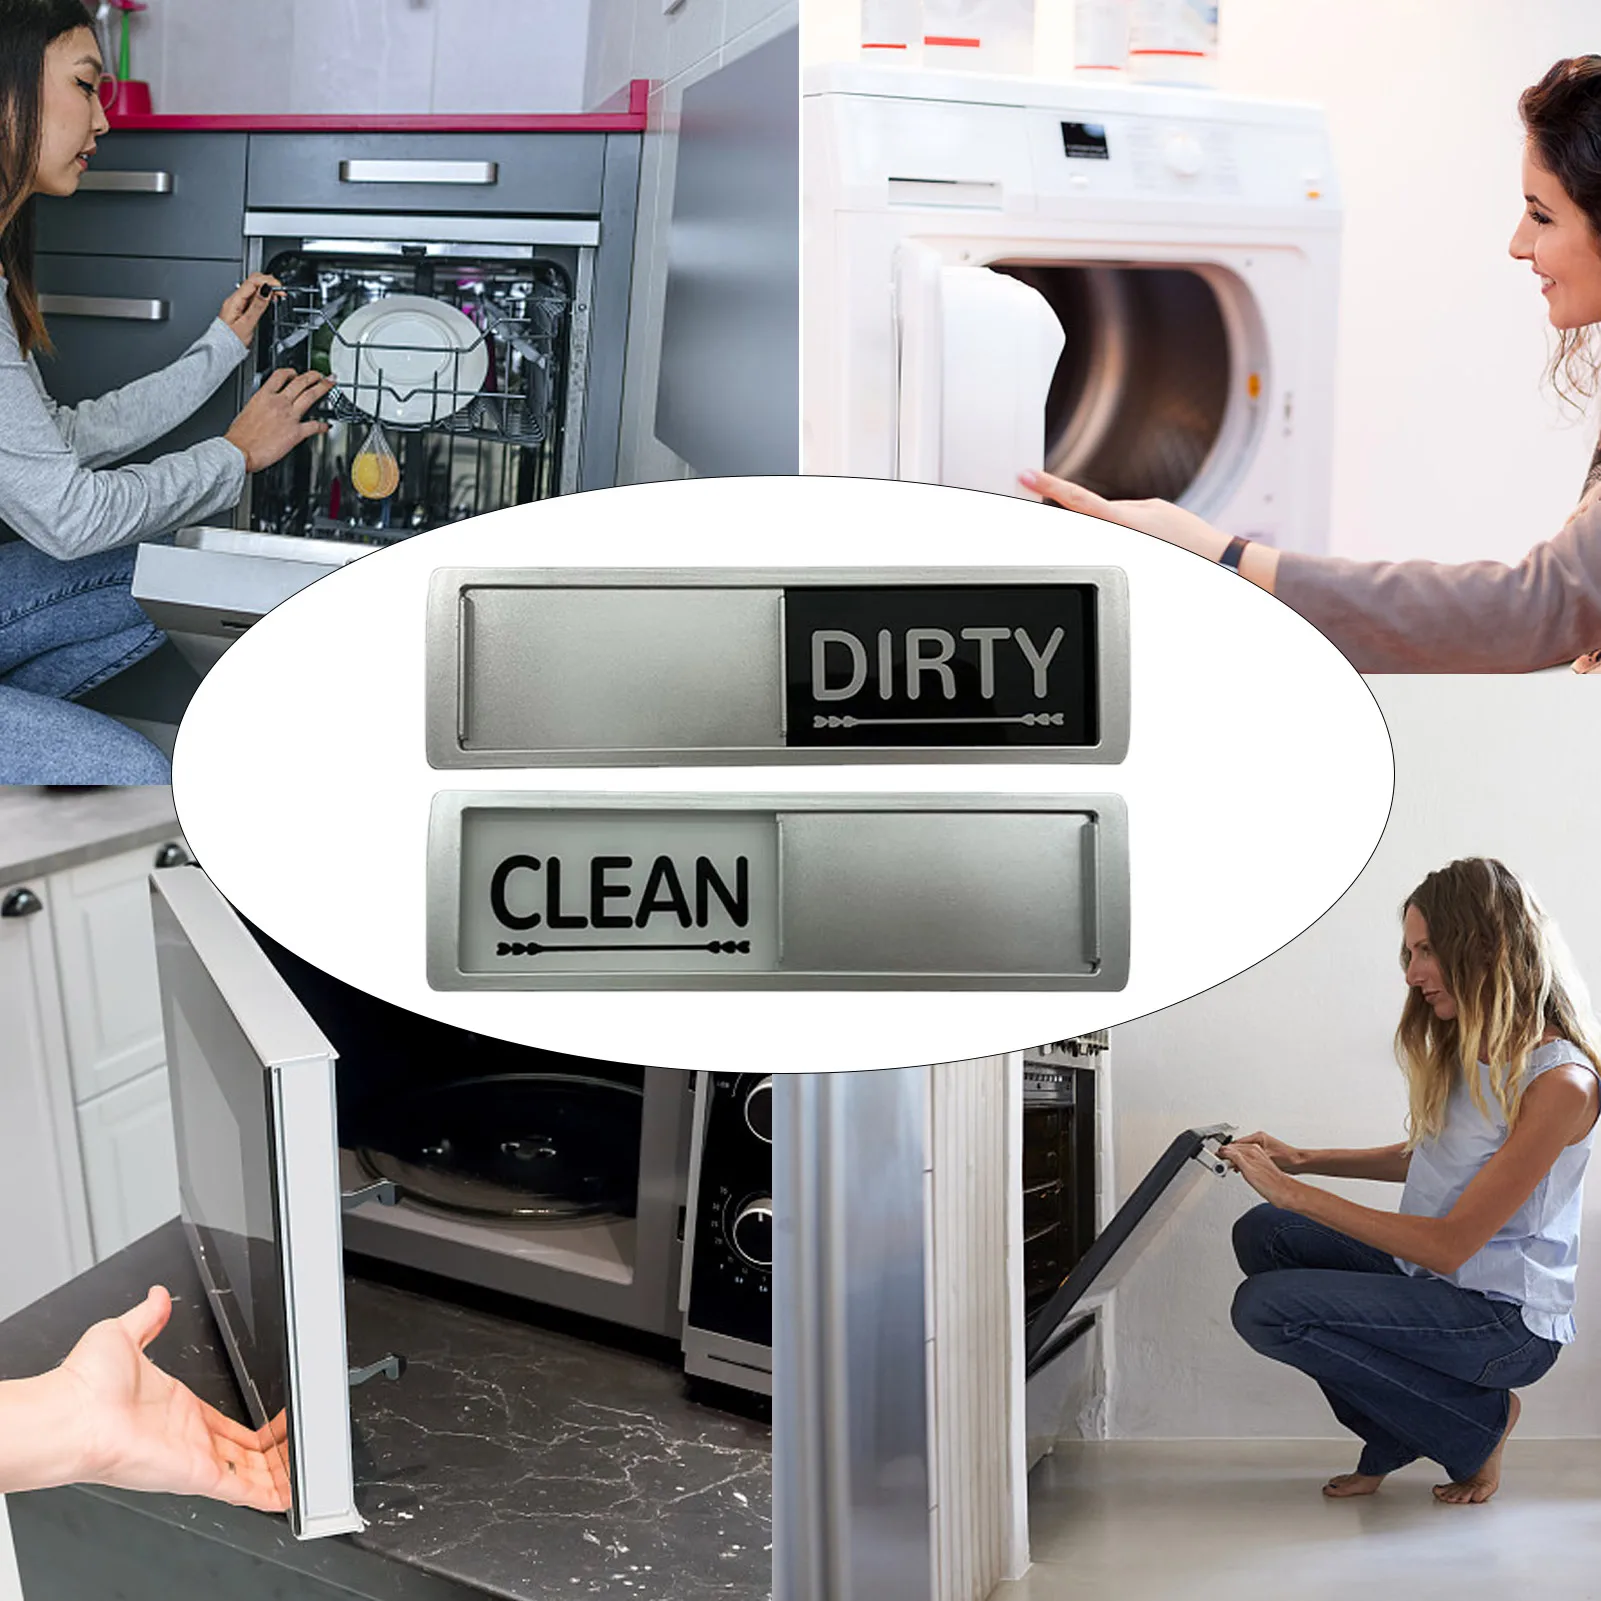 Kitchen Dishwasher Clean Dirty Sign Magnet Non-Scratching Strong